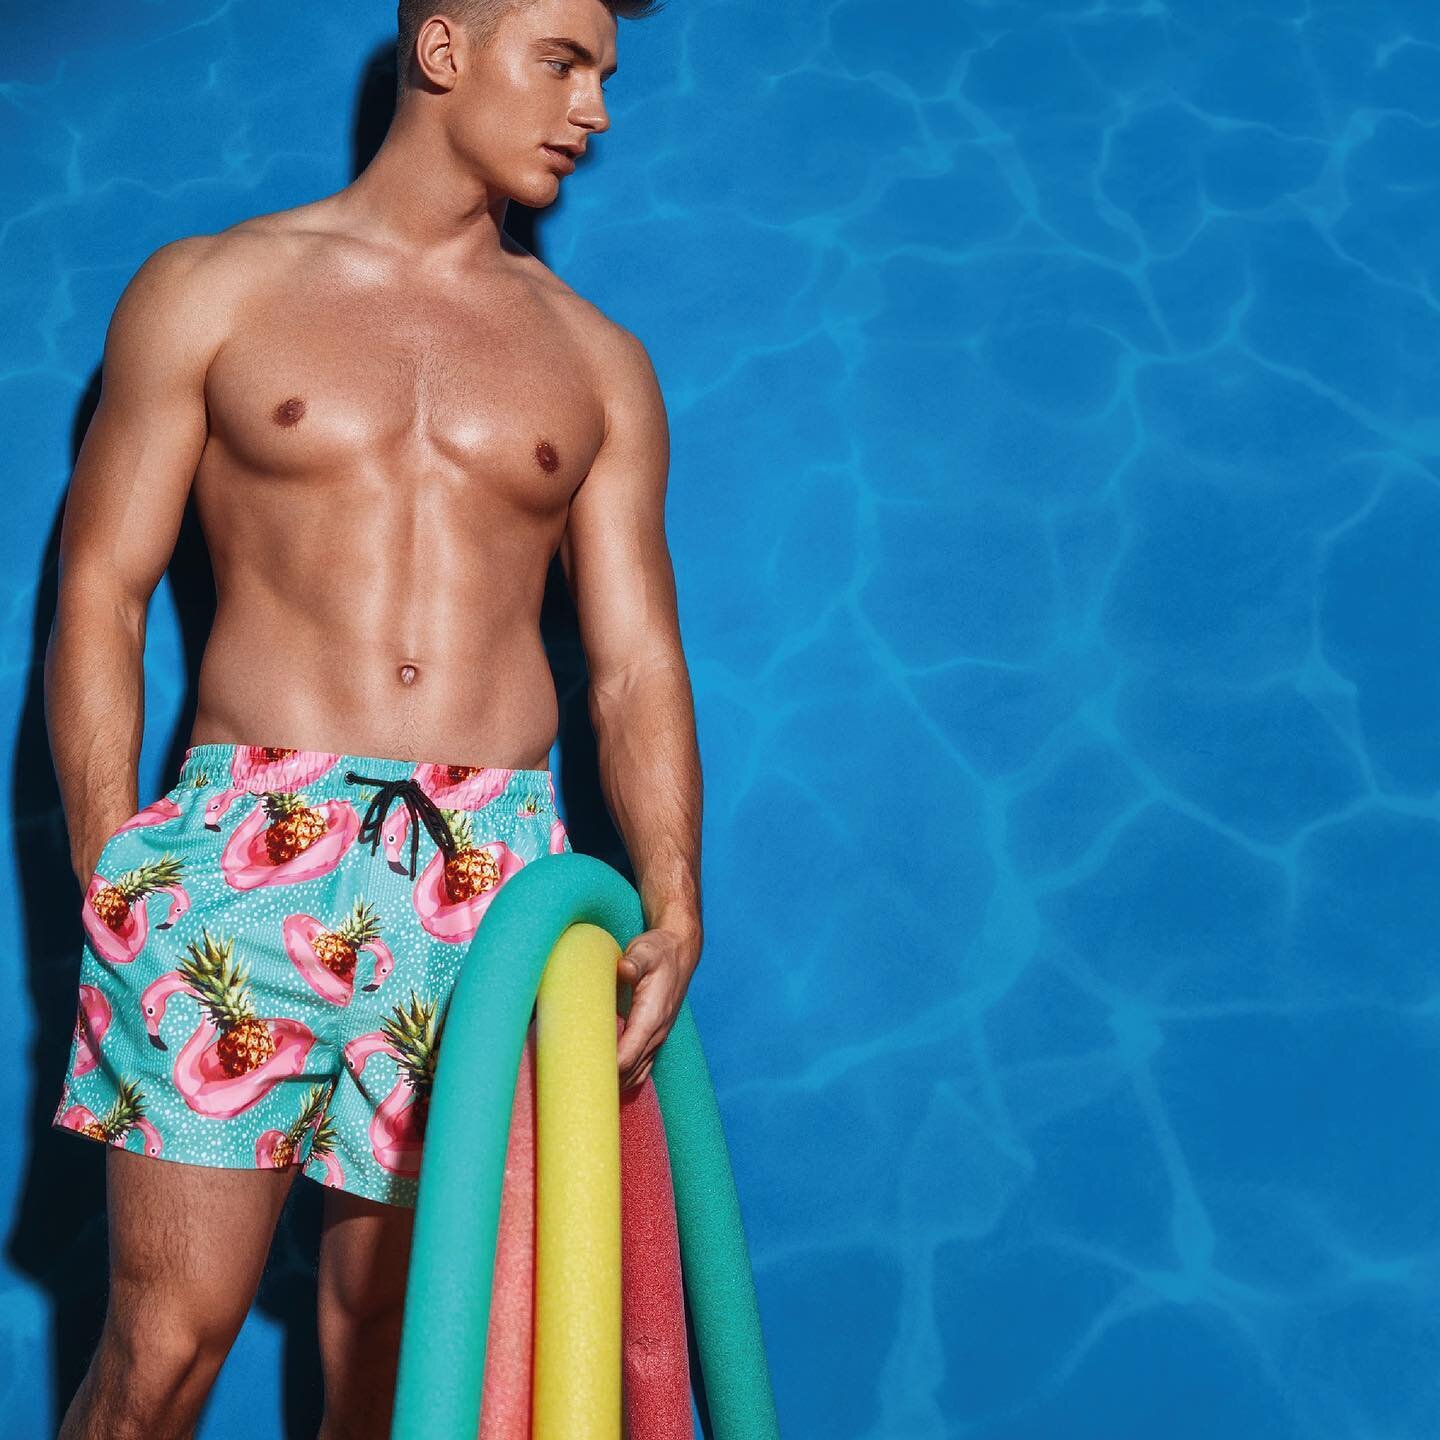 Style out this summer in our Let&rsquo;s Flamingle swim shorts!⁣
⁣
#JoeBoxer #JoeBoxerSwimwear #ShowYourJoe